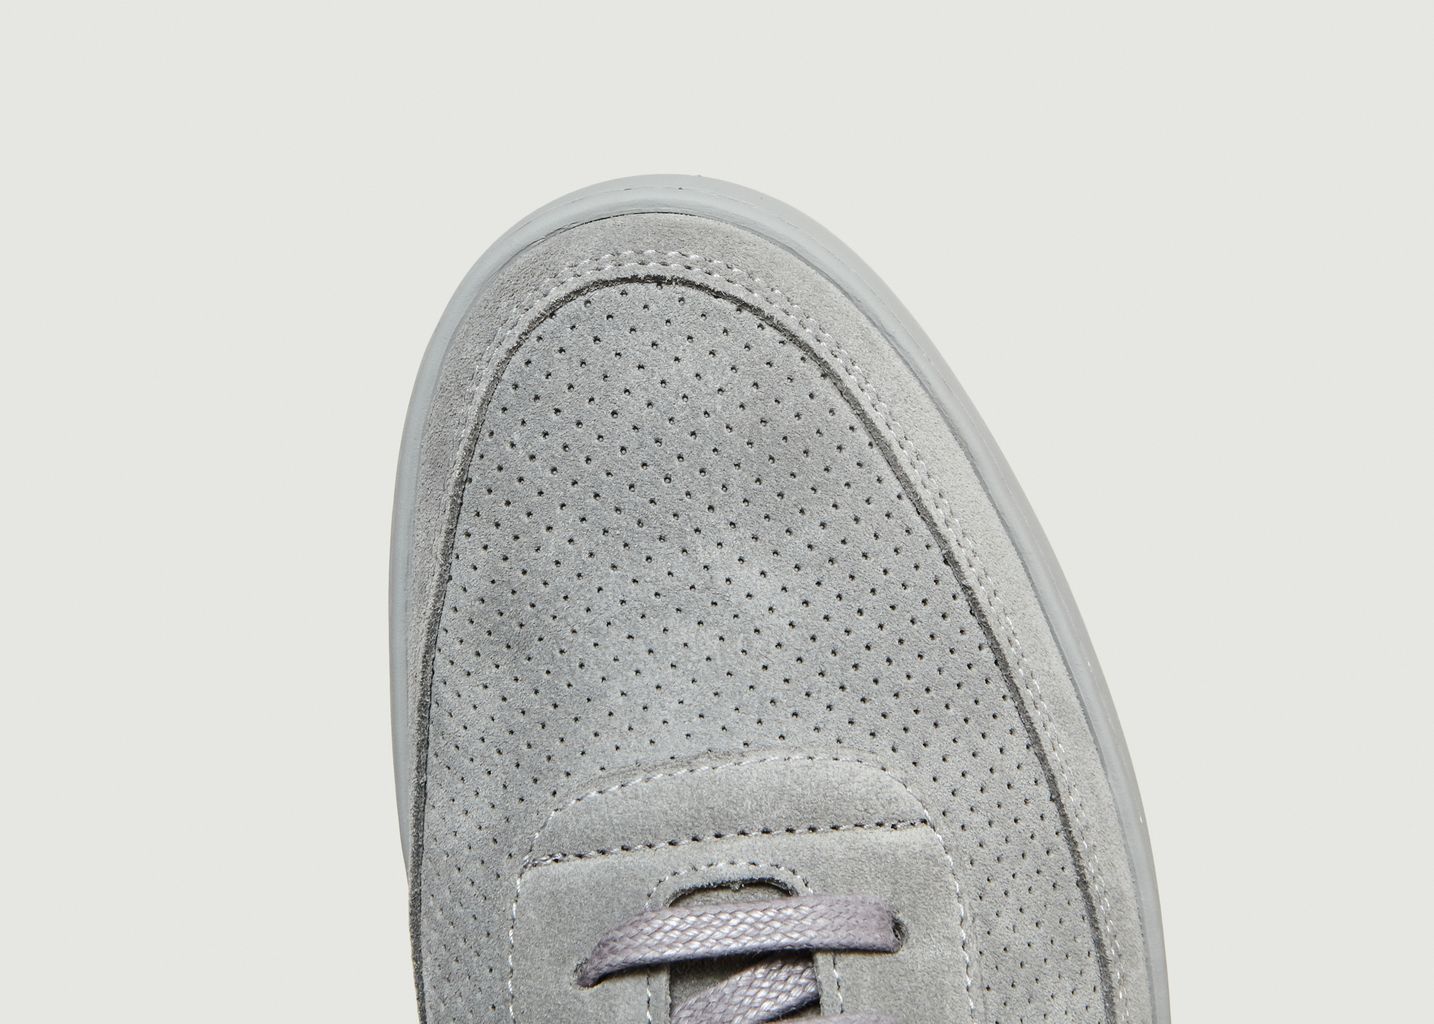 Sneakers Perforated - Filling Pieces